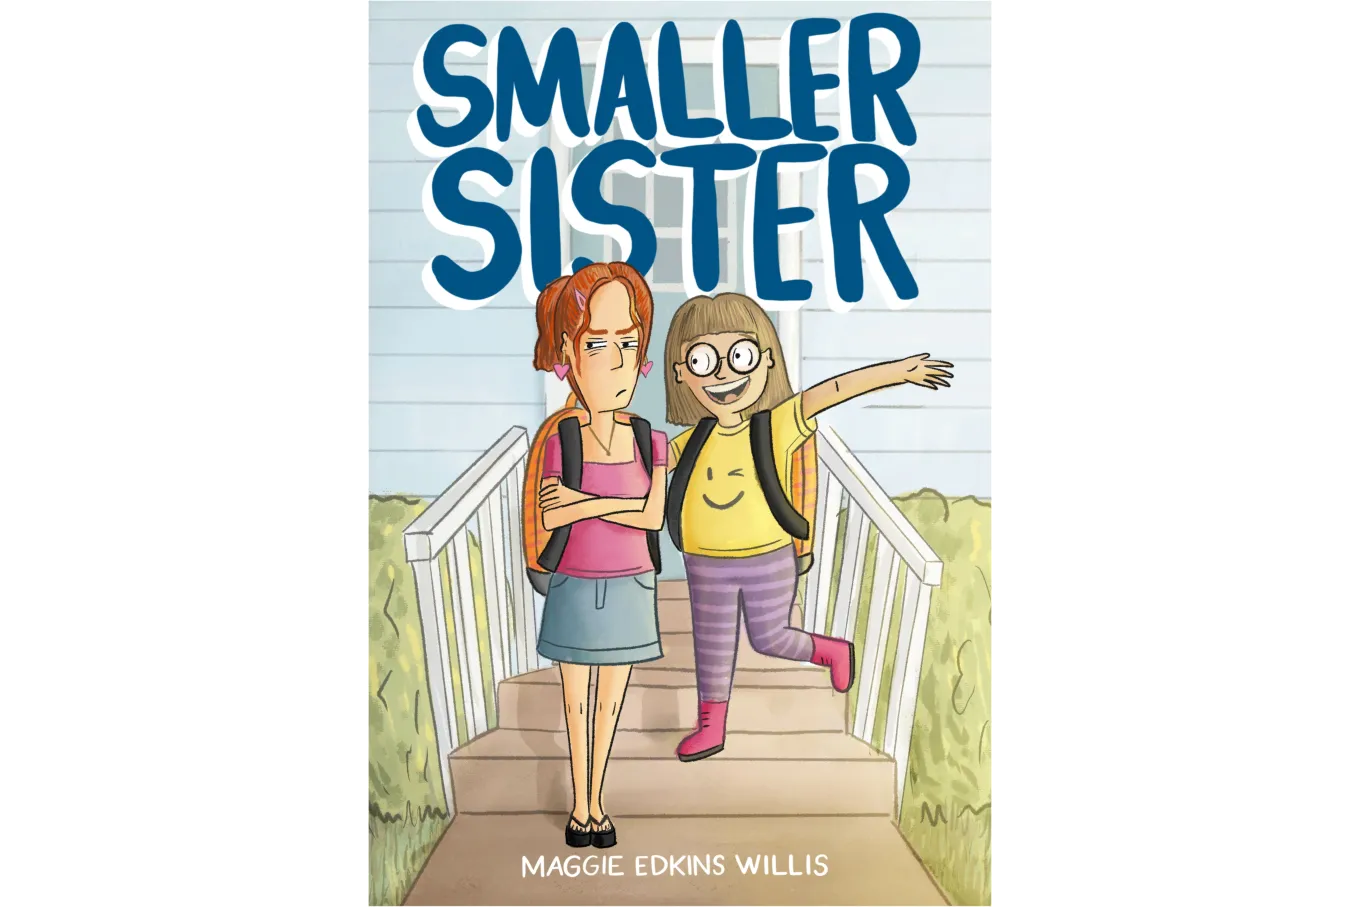 Cover of the book smaller sister